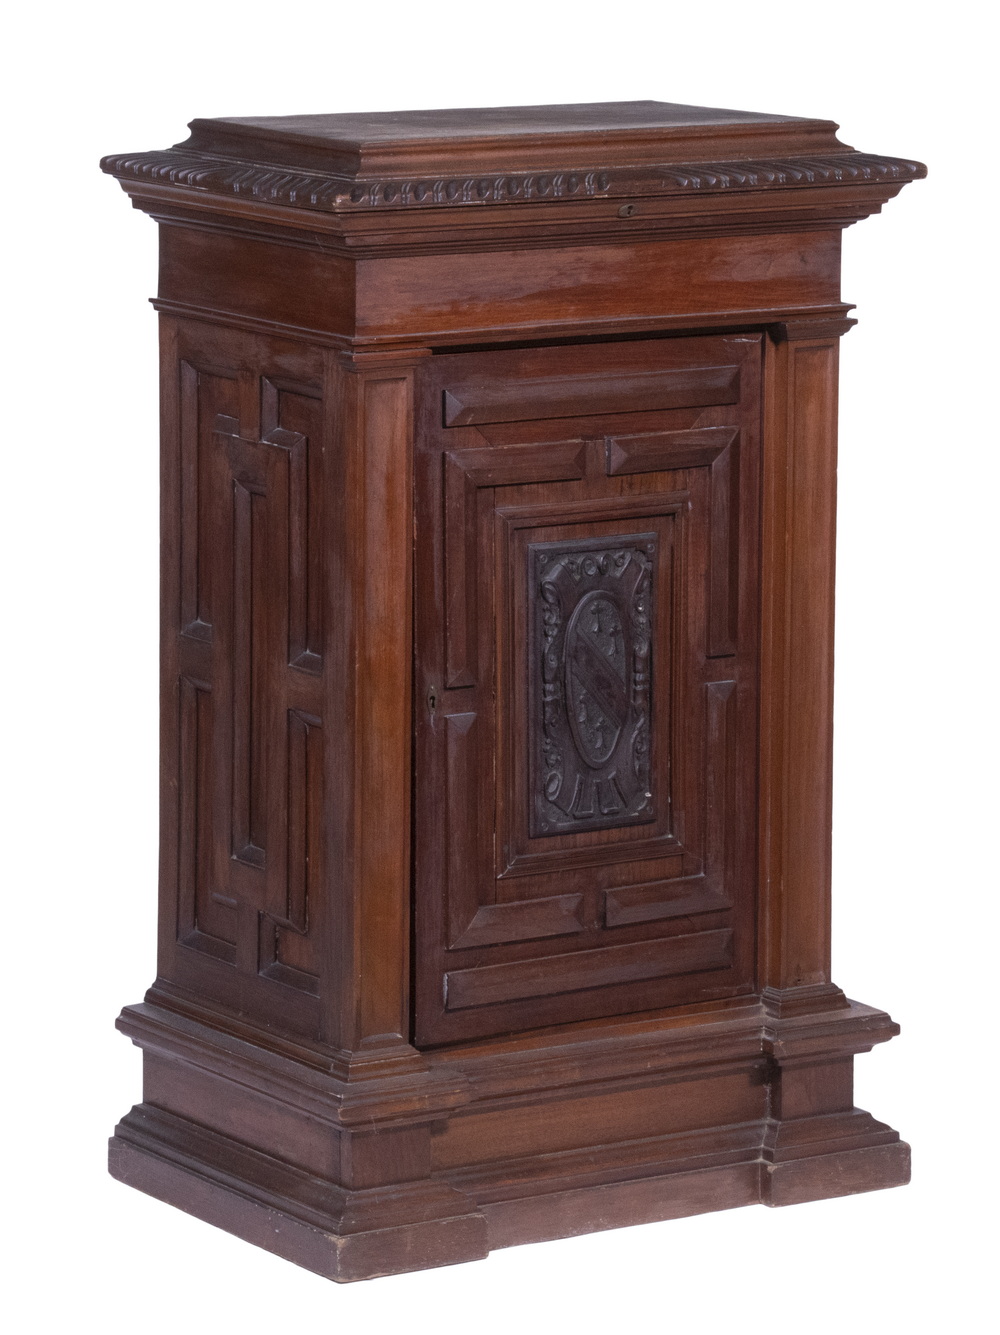 WALNUT VICTROLA CABINET Early 20th 302090